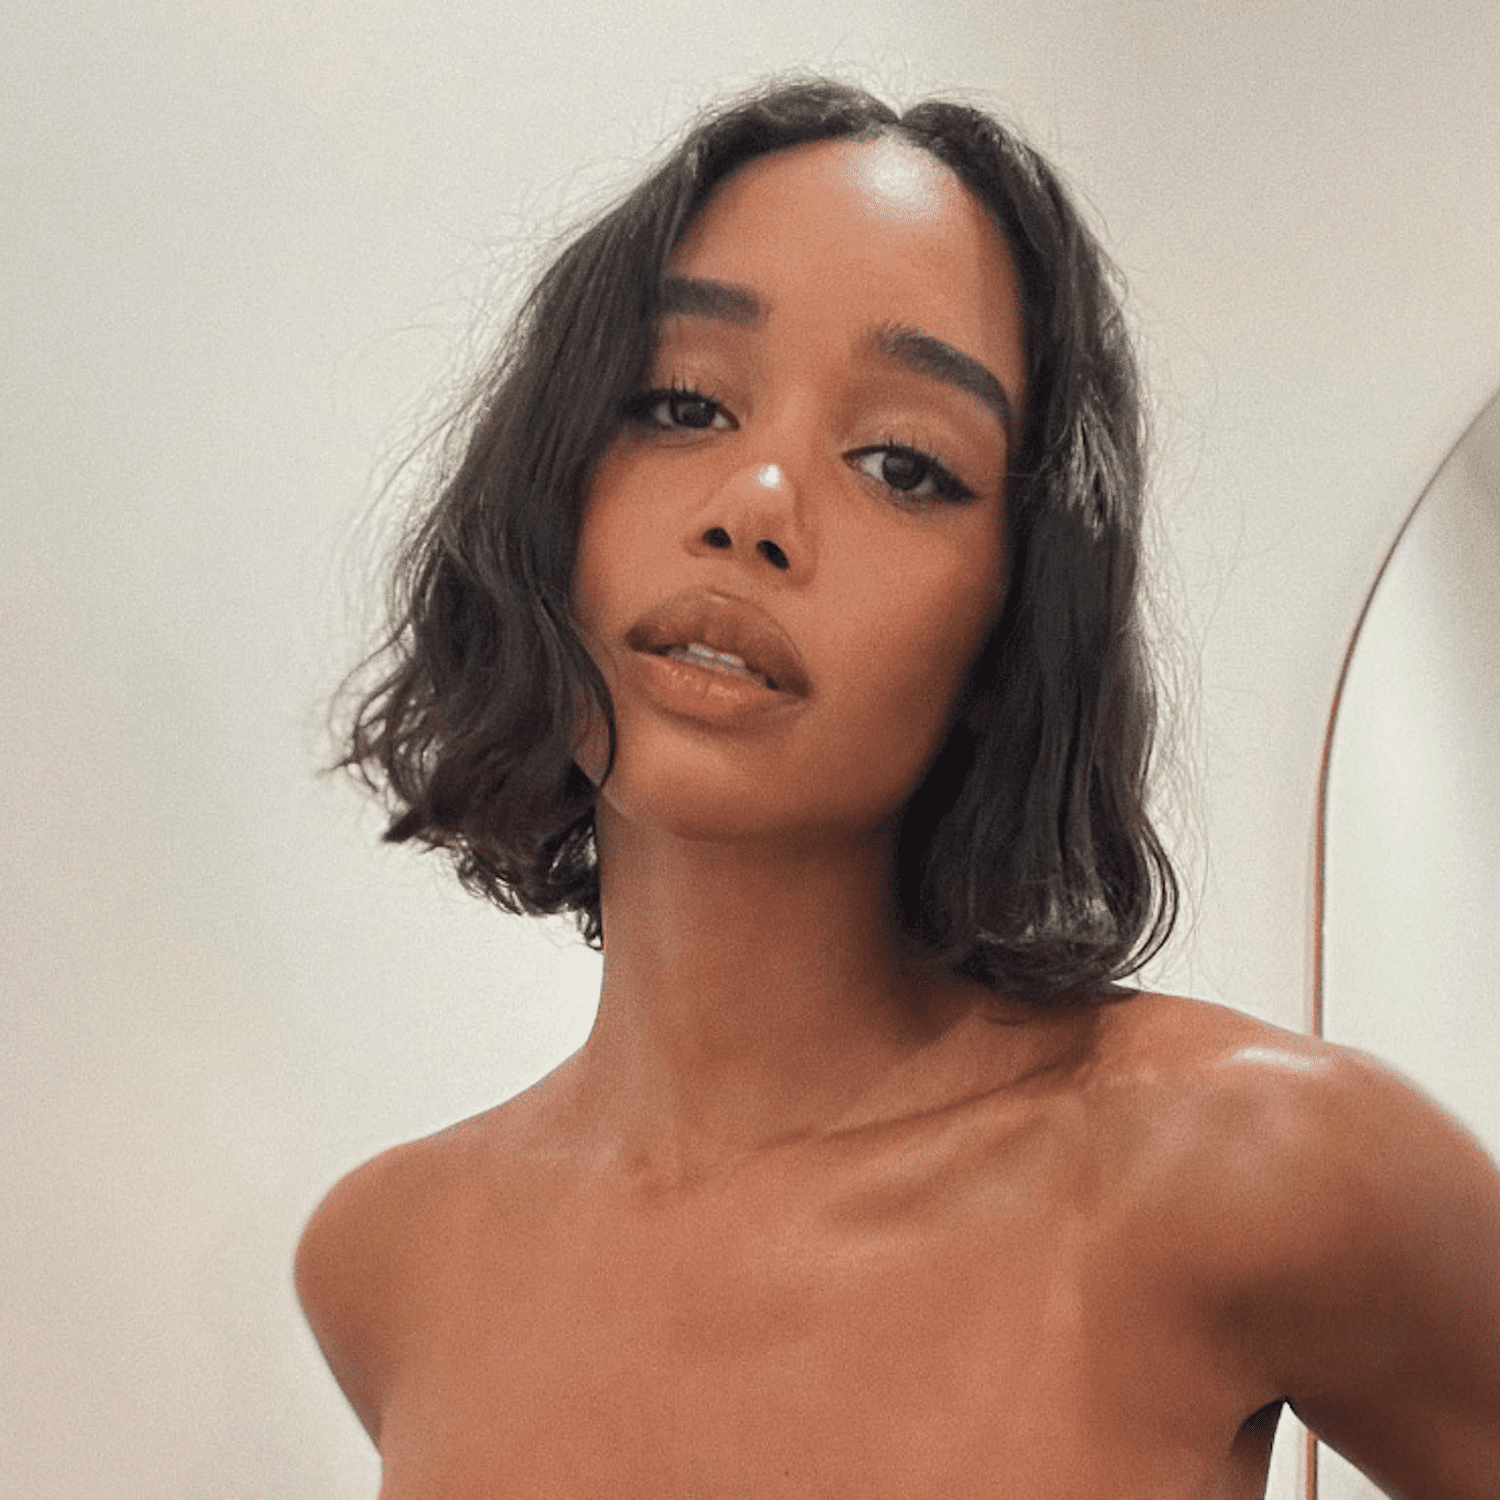 Laura Harrier attends a Burberry event with diffused waves in her long bob